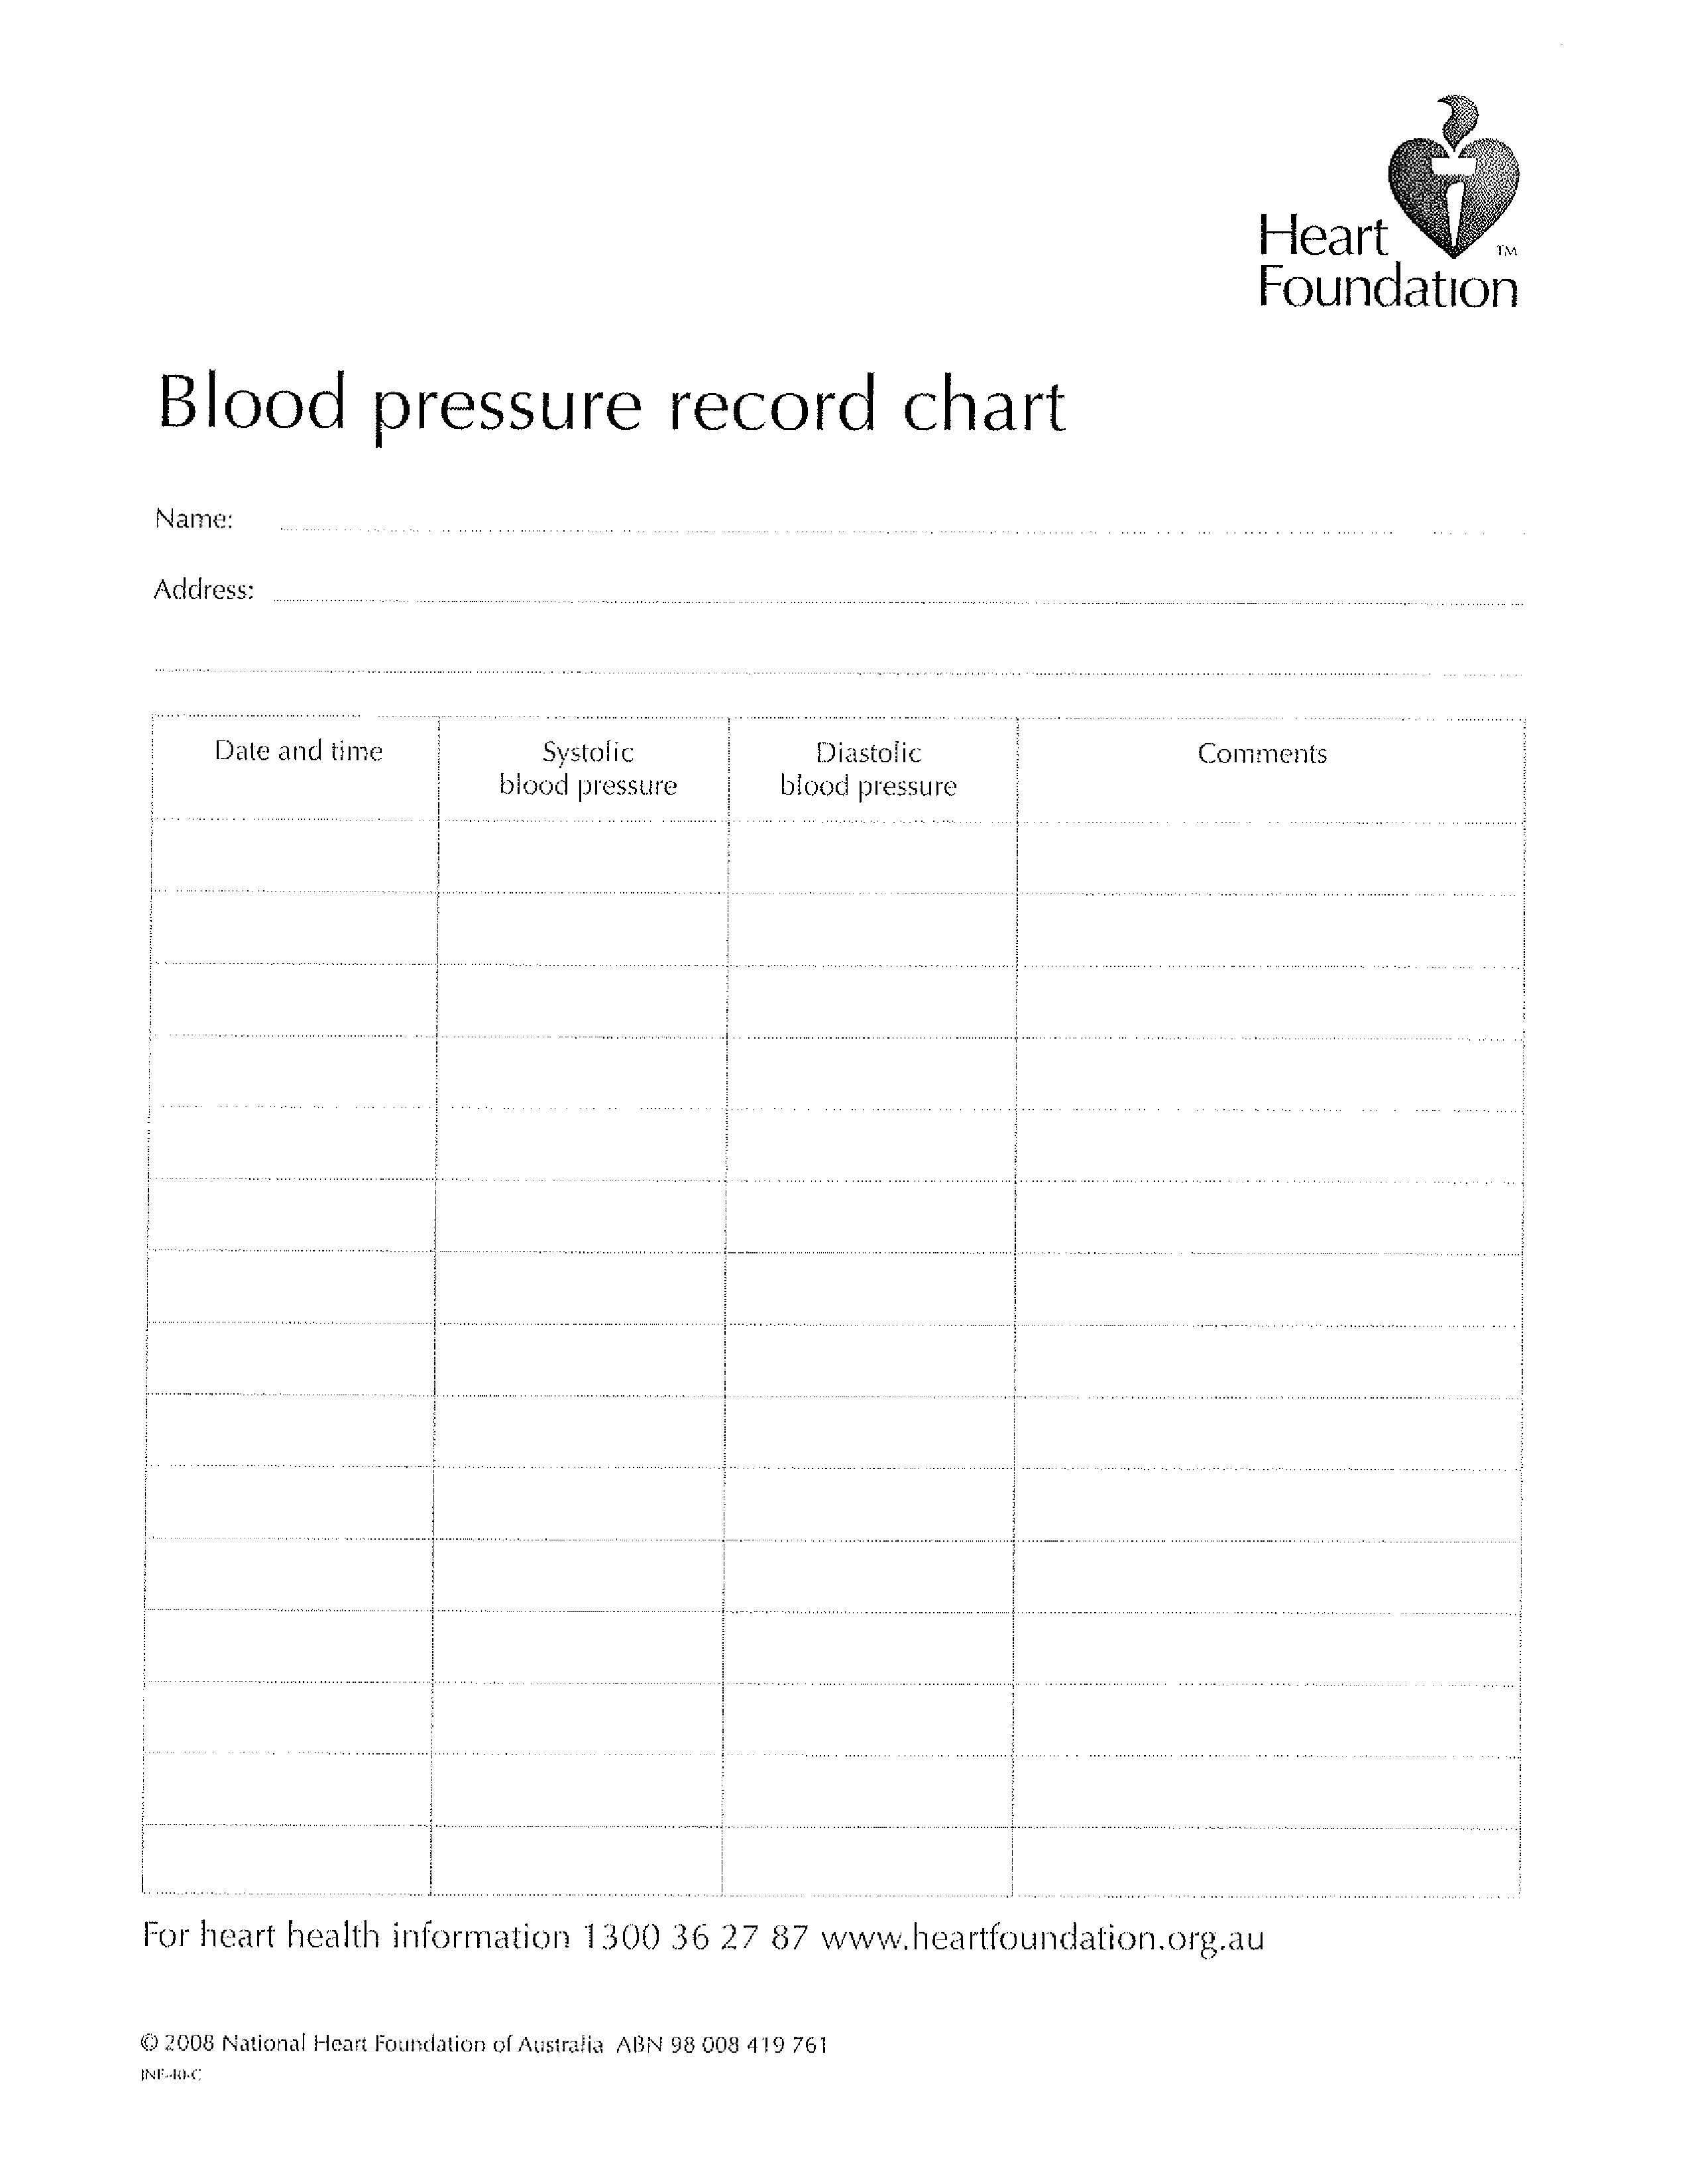 record chart template